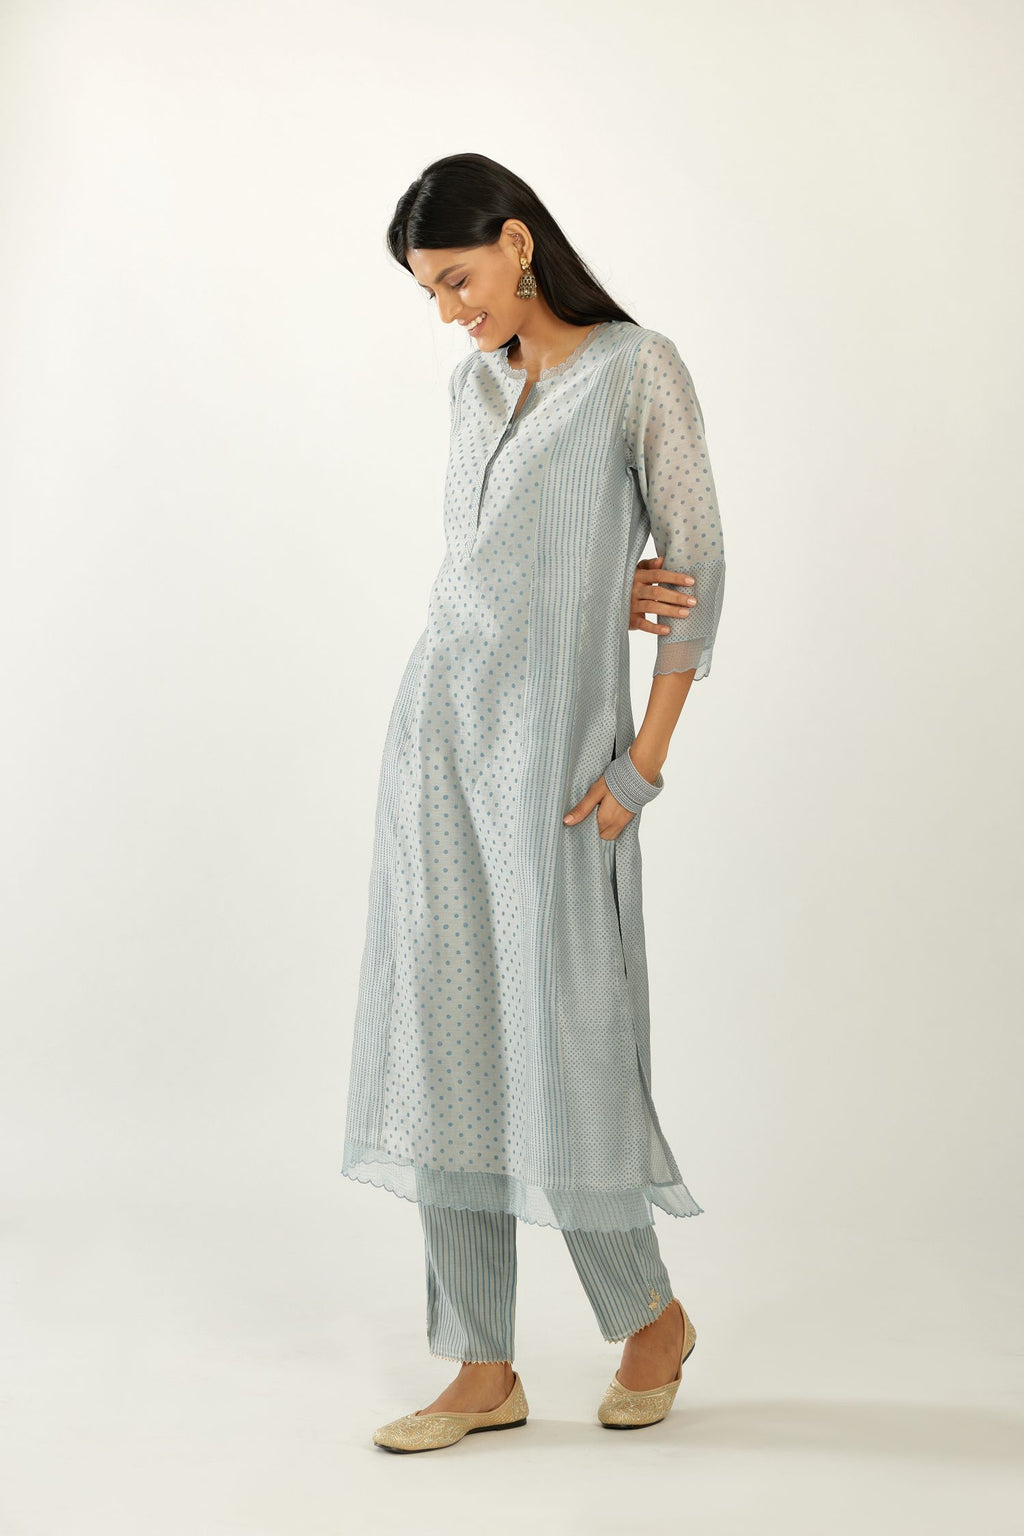 Blue silk chanderi hand block printed straight kurta set with concealed button placket neckline, highlighted with scalloped organza at edges.